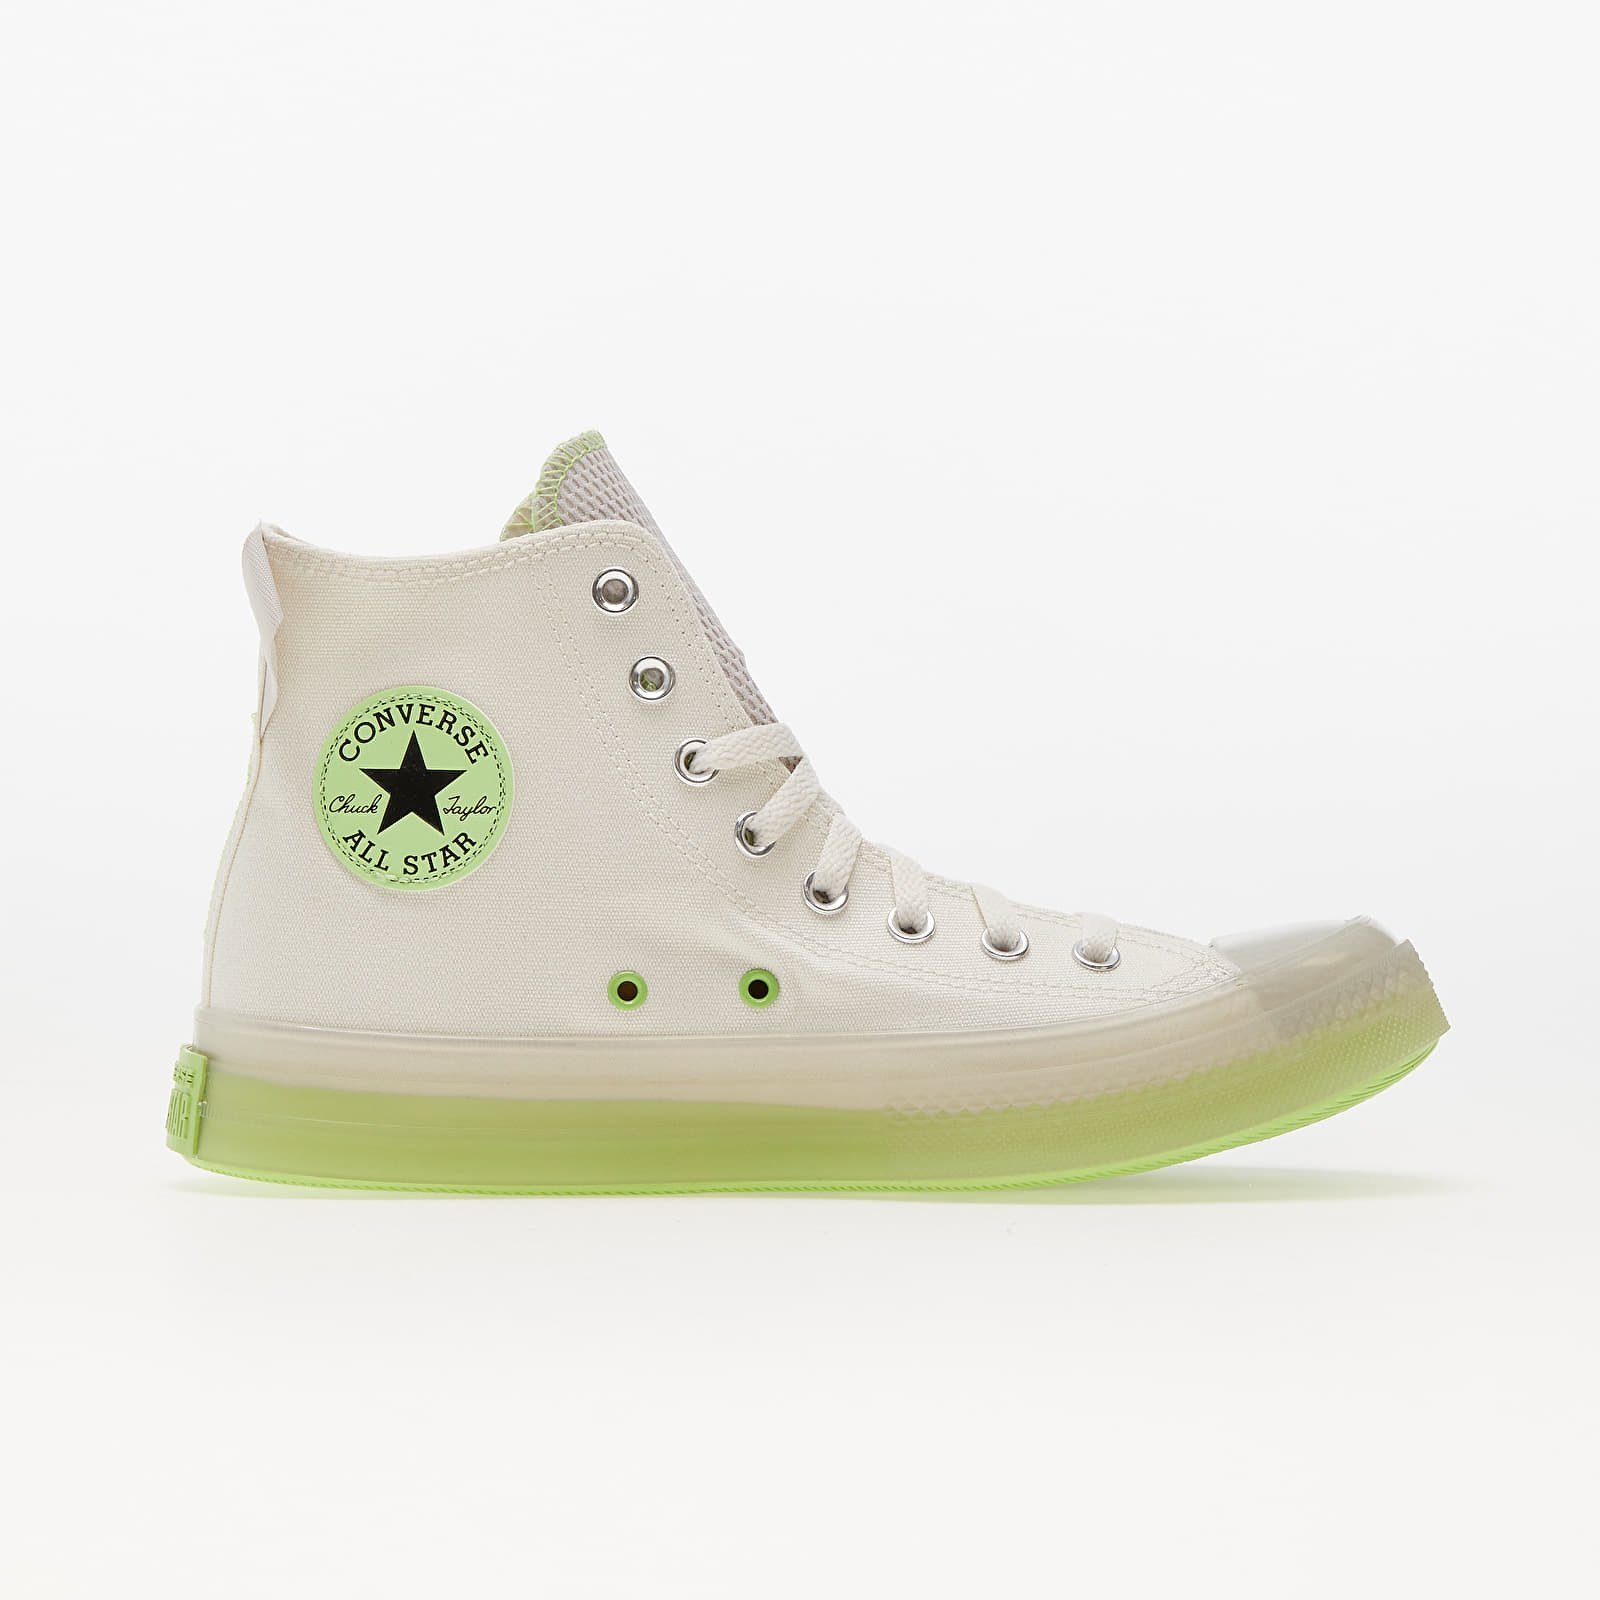 Chuck Taylor All Star CX "Crafted Stripes"